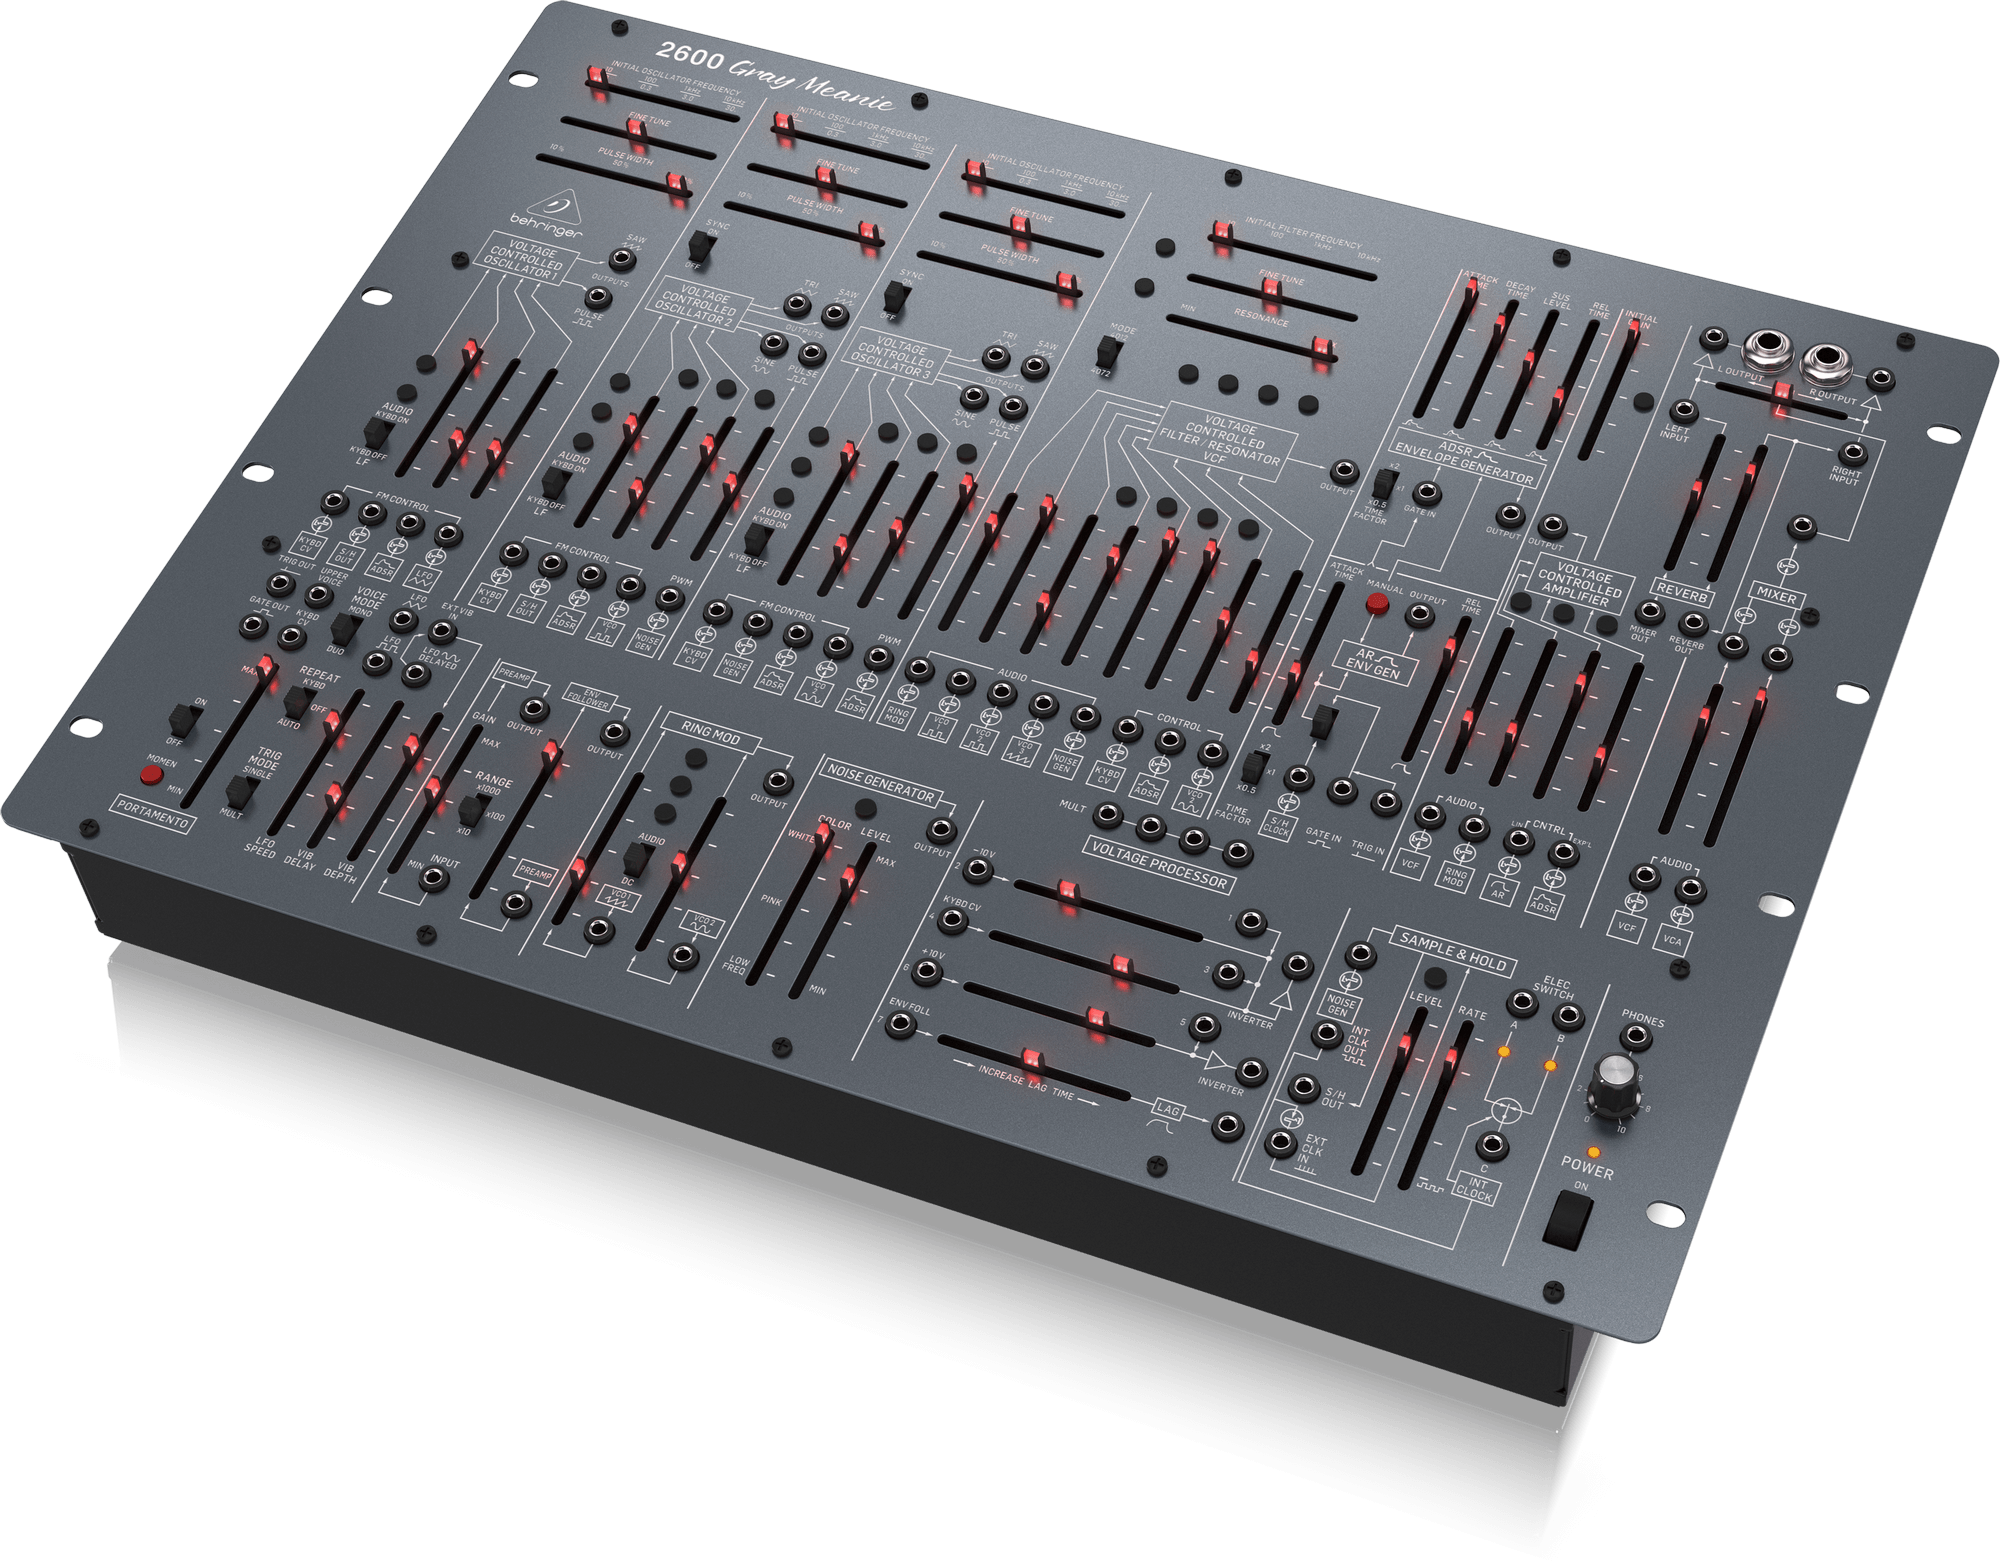 Behringer 2600 GRAY MEANIE